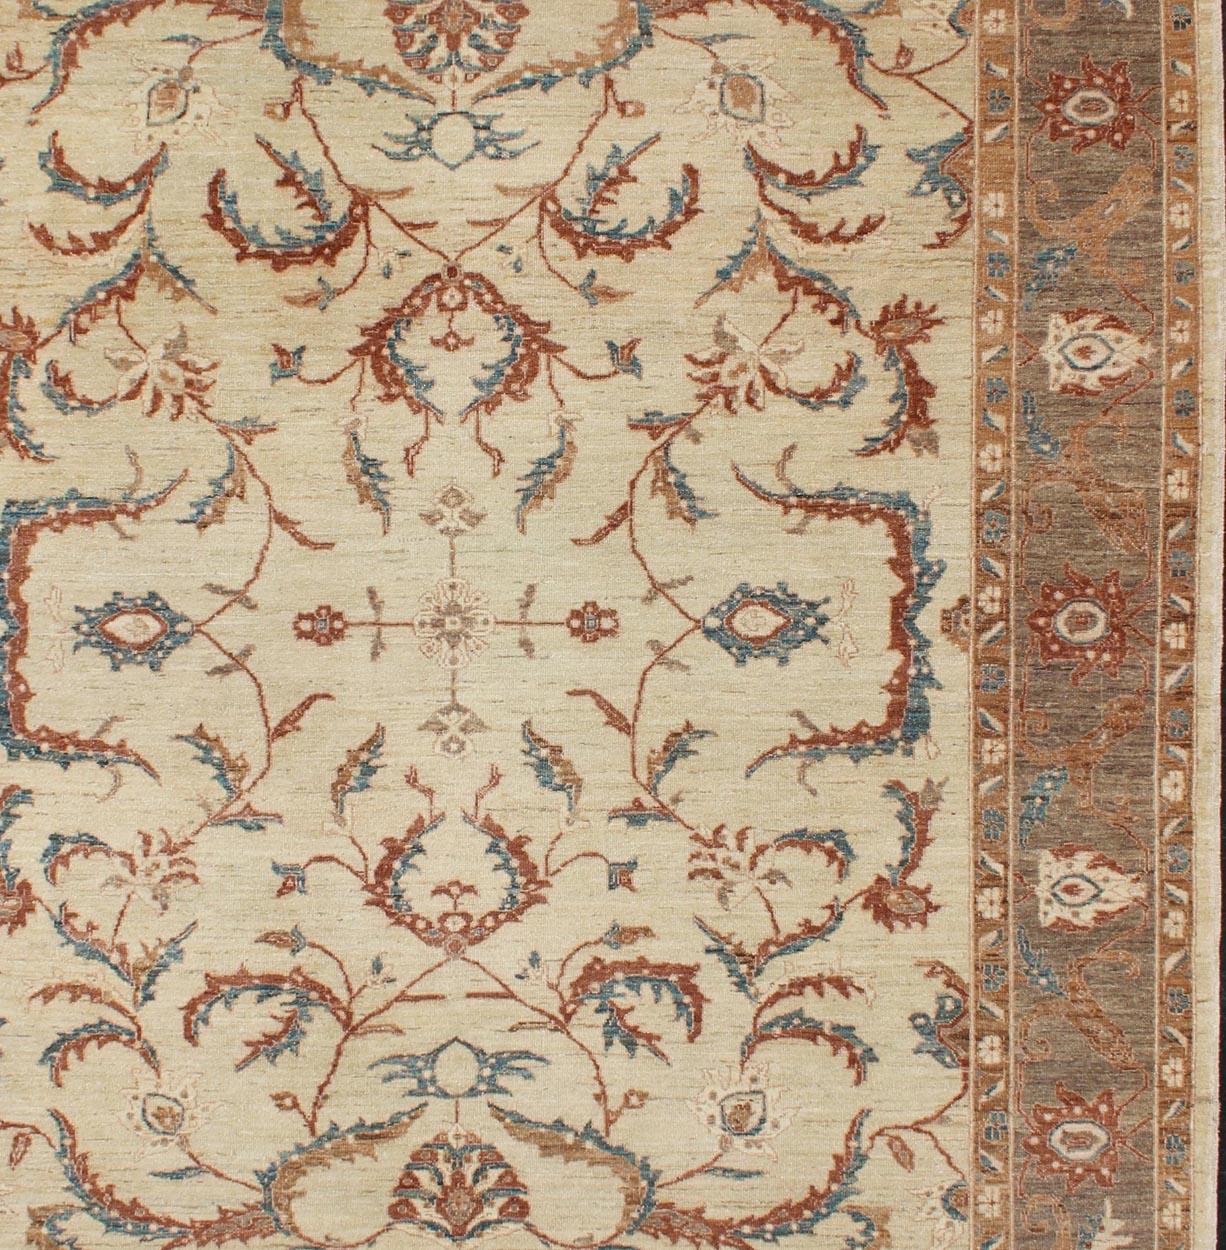 Tabriz design from Afghanistan with all-over floral design in taupe and cream, rug DSP-BC11593, country of origin / type: Afghanistan / Tabriz, late 20th century

This with a sophisticated, all-over design features a natural color combination with